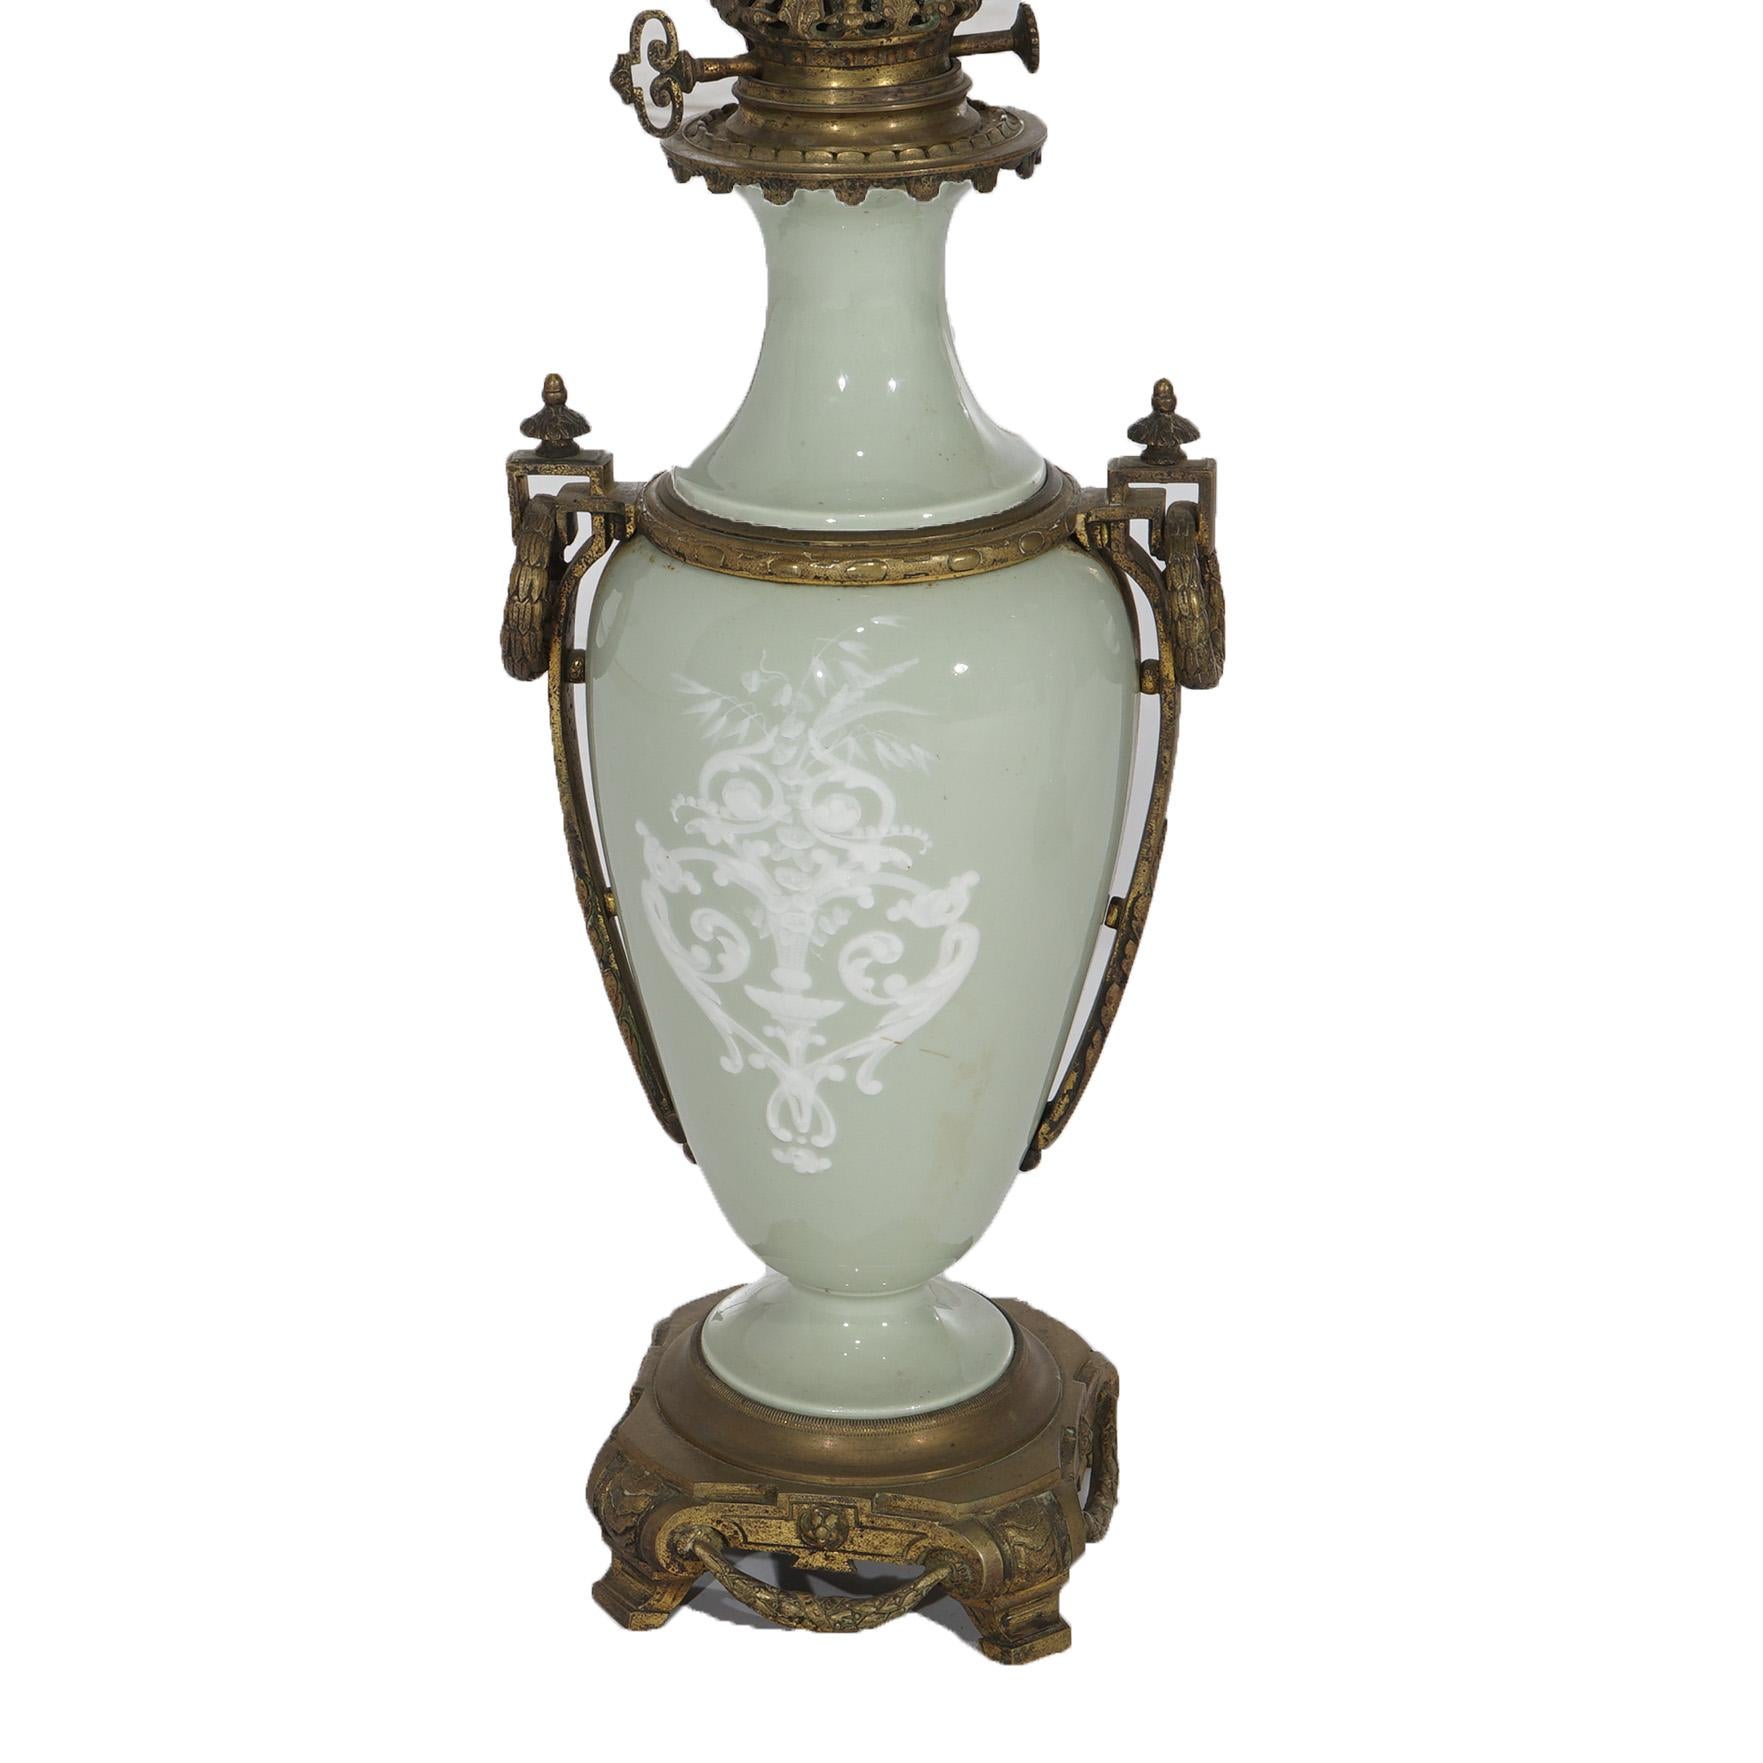 American Antique French Gilt Bronze & Porcelain Celadon Cameo Lamps with Figures1920 For Sale